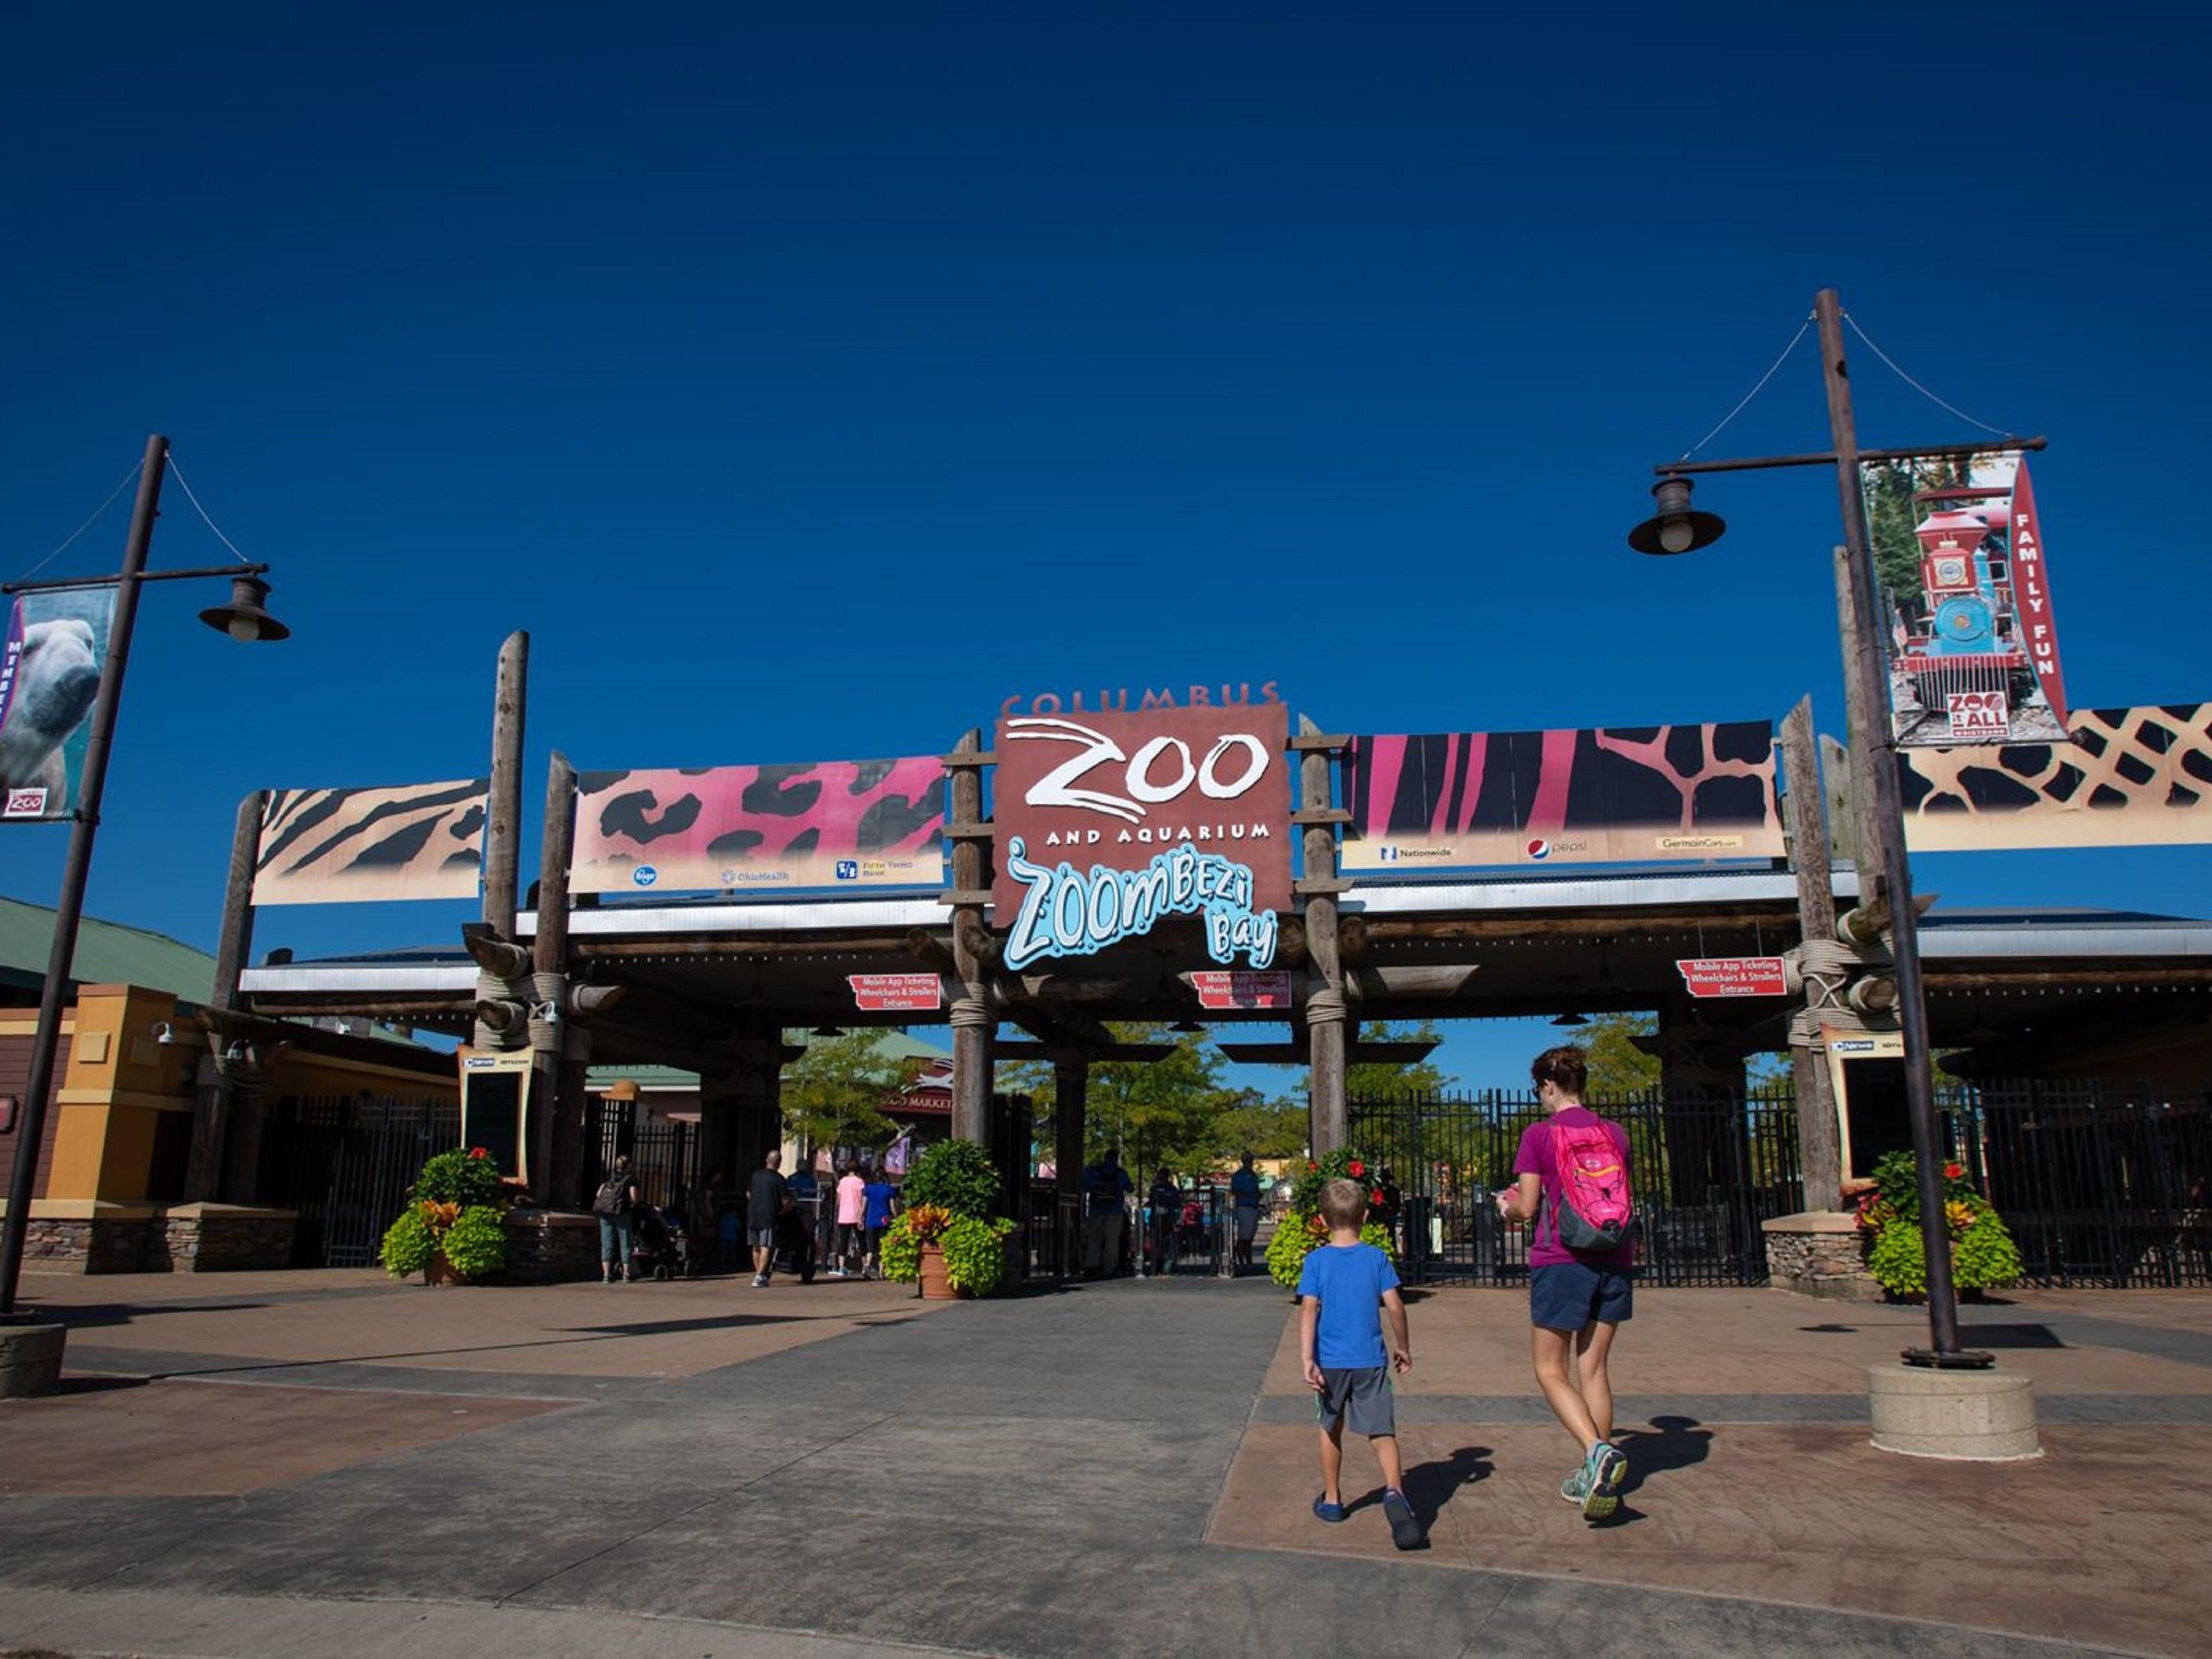 Enjoy the Zoo this summer!